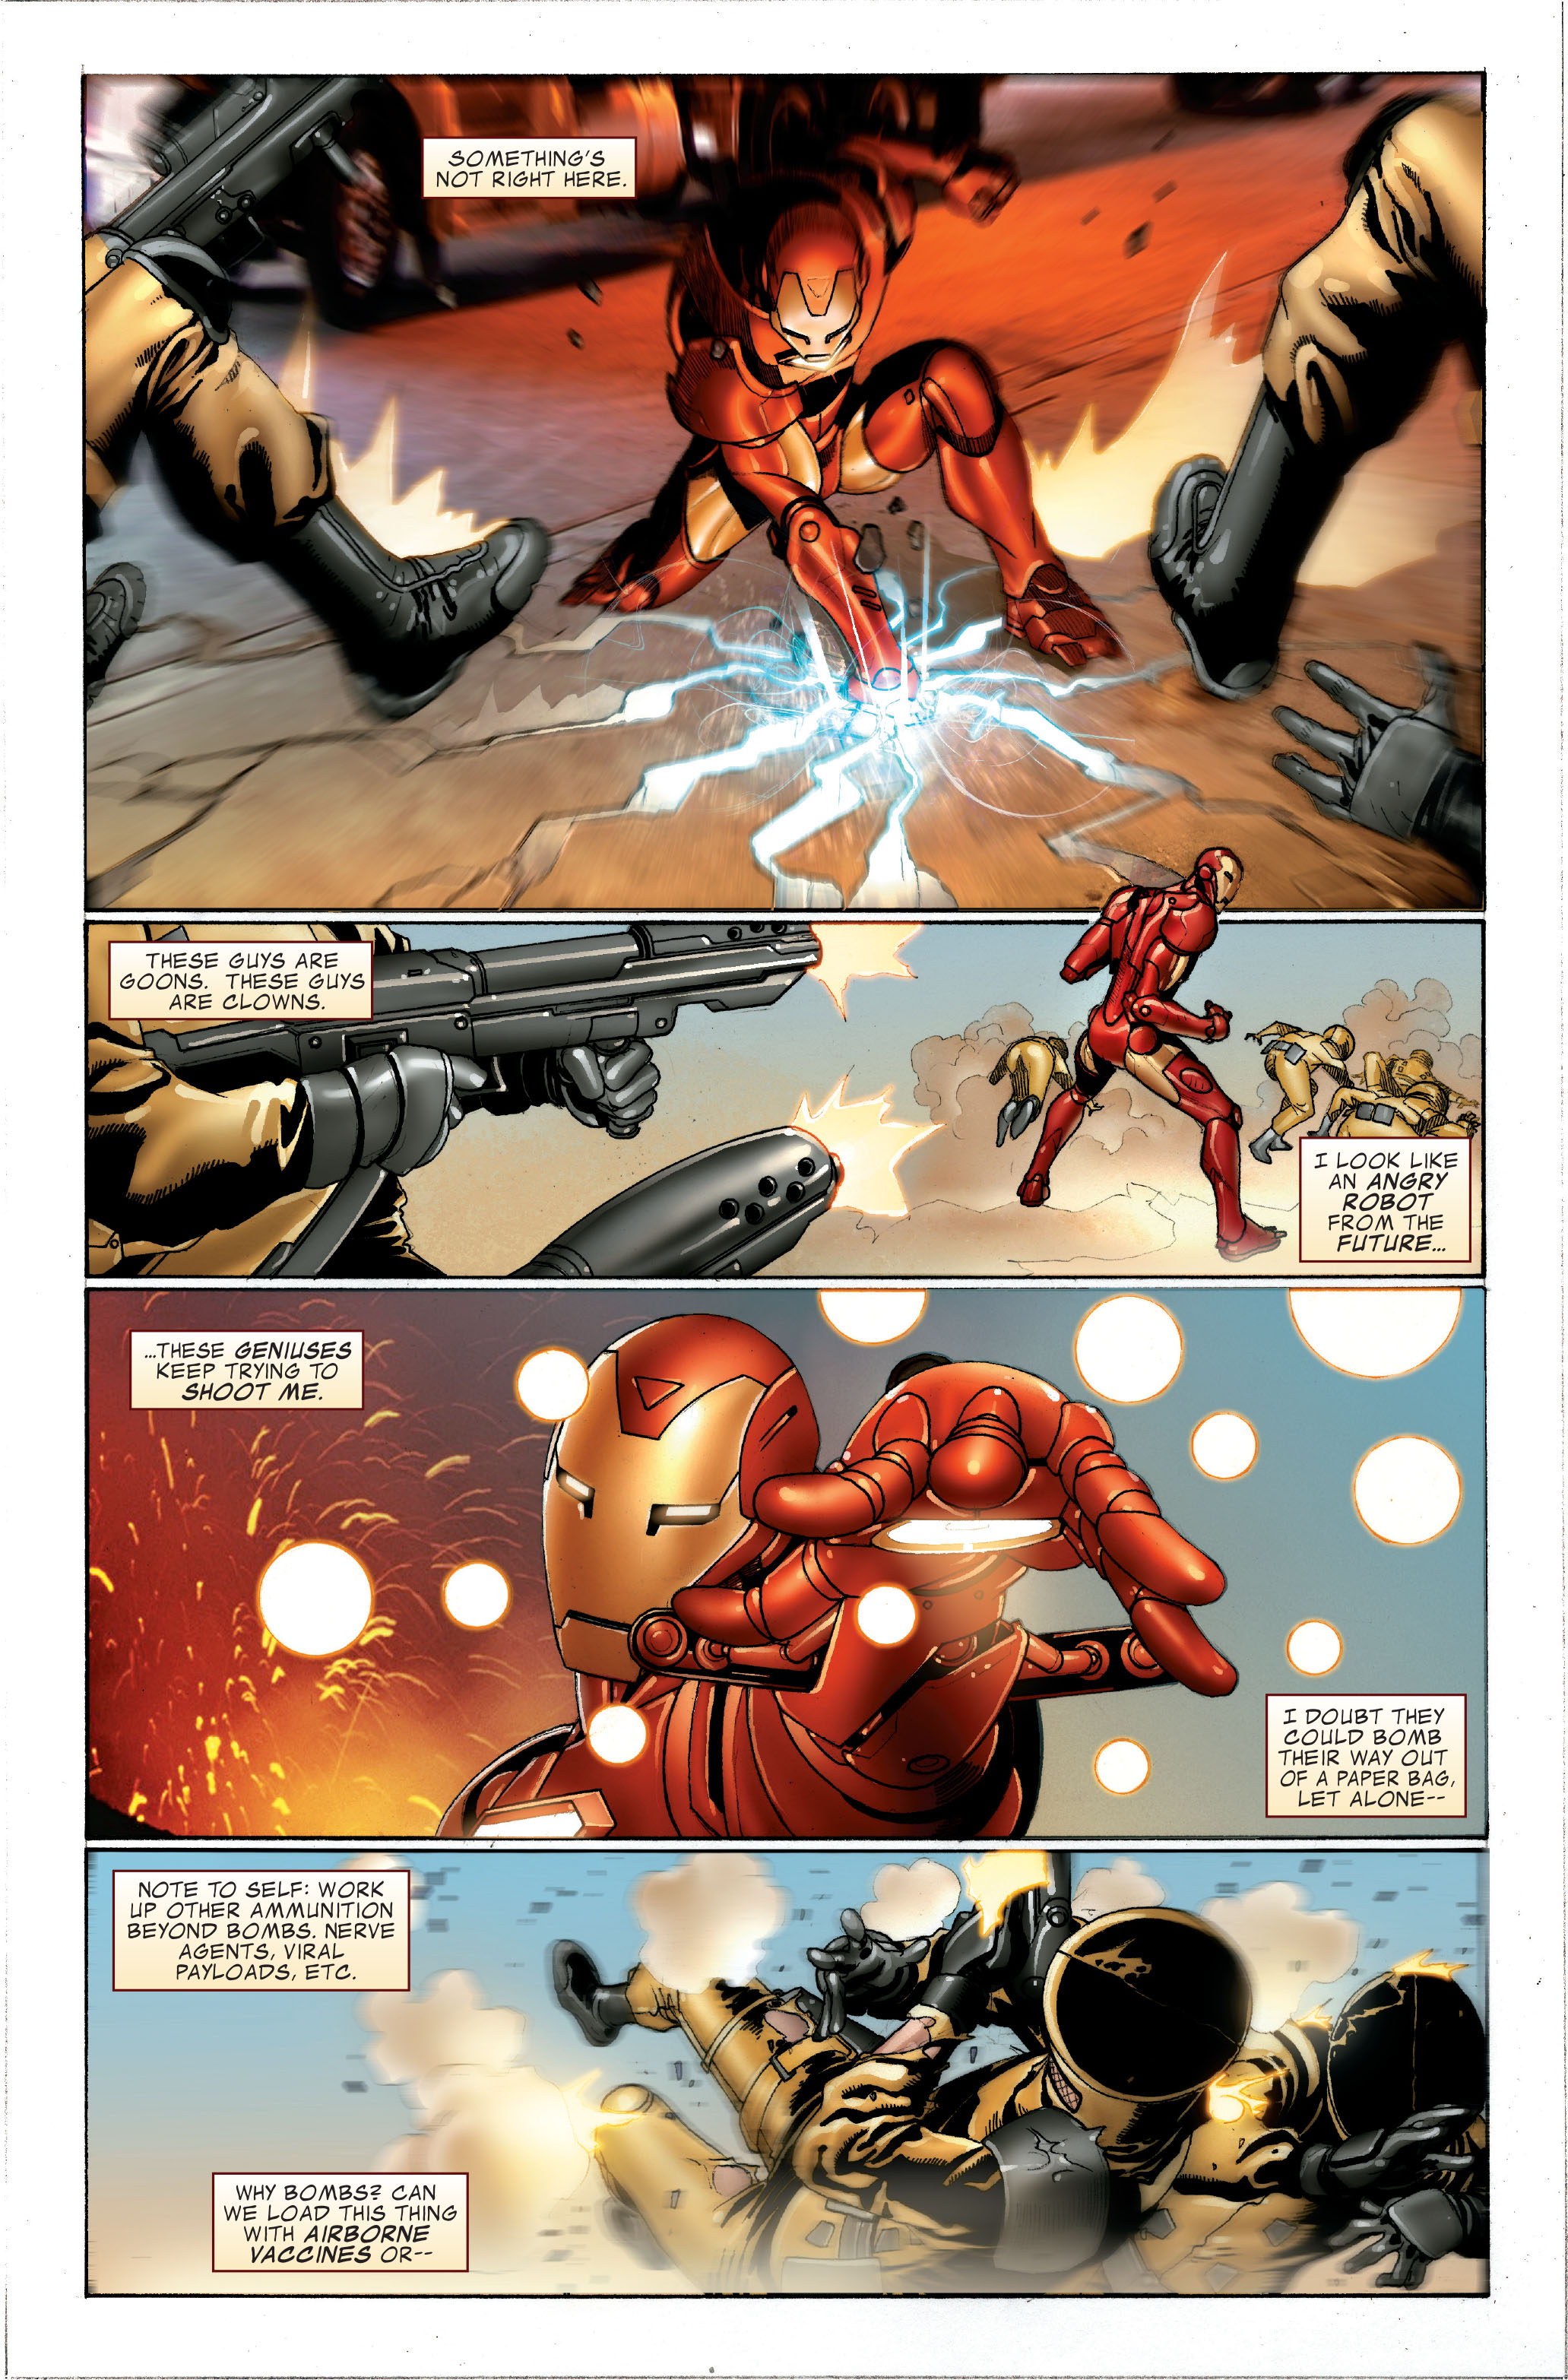 Invincible Iron Man (2008) 1 Page 22